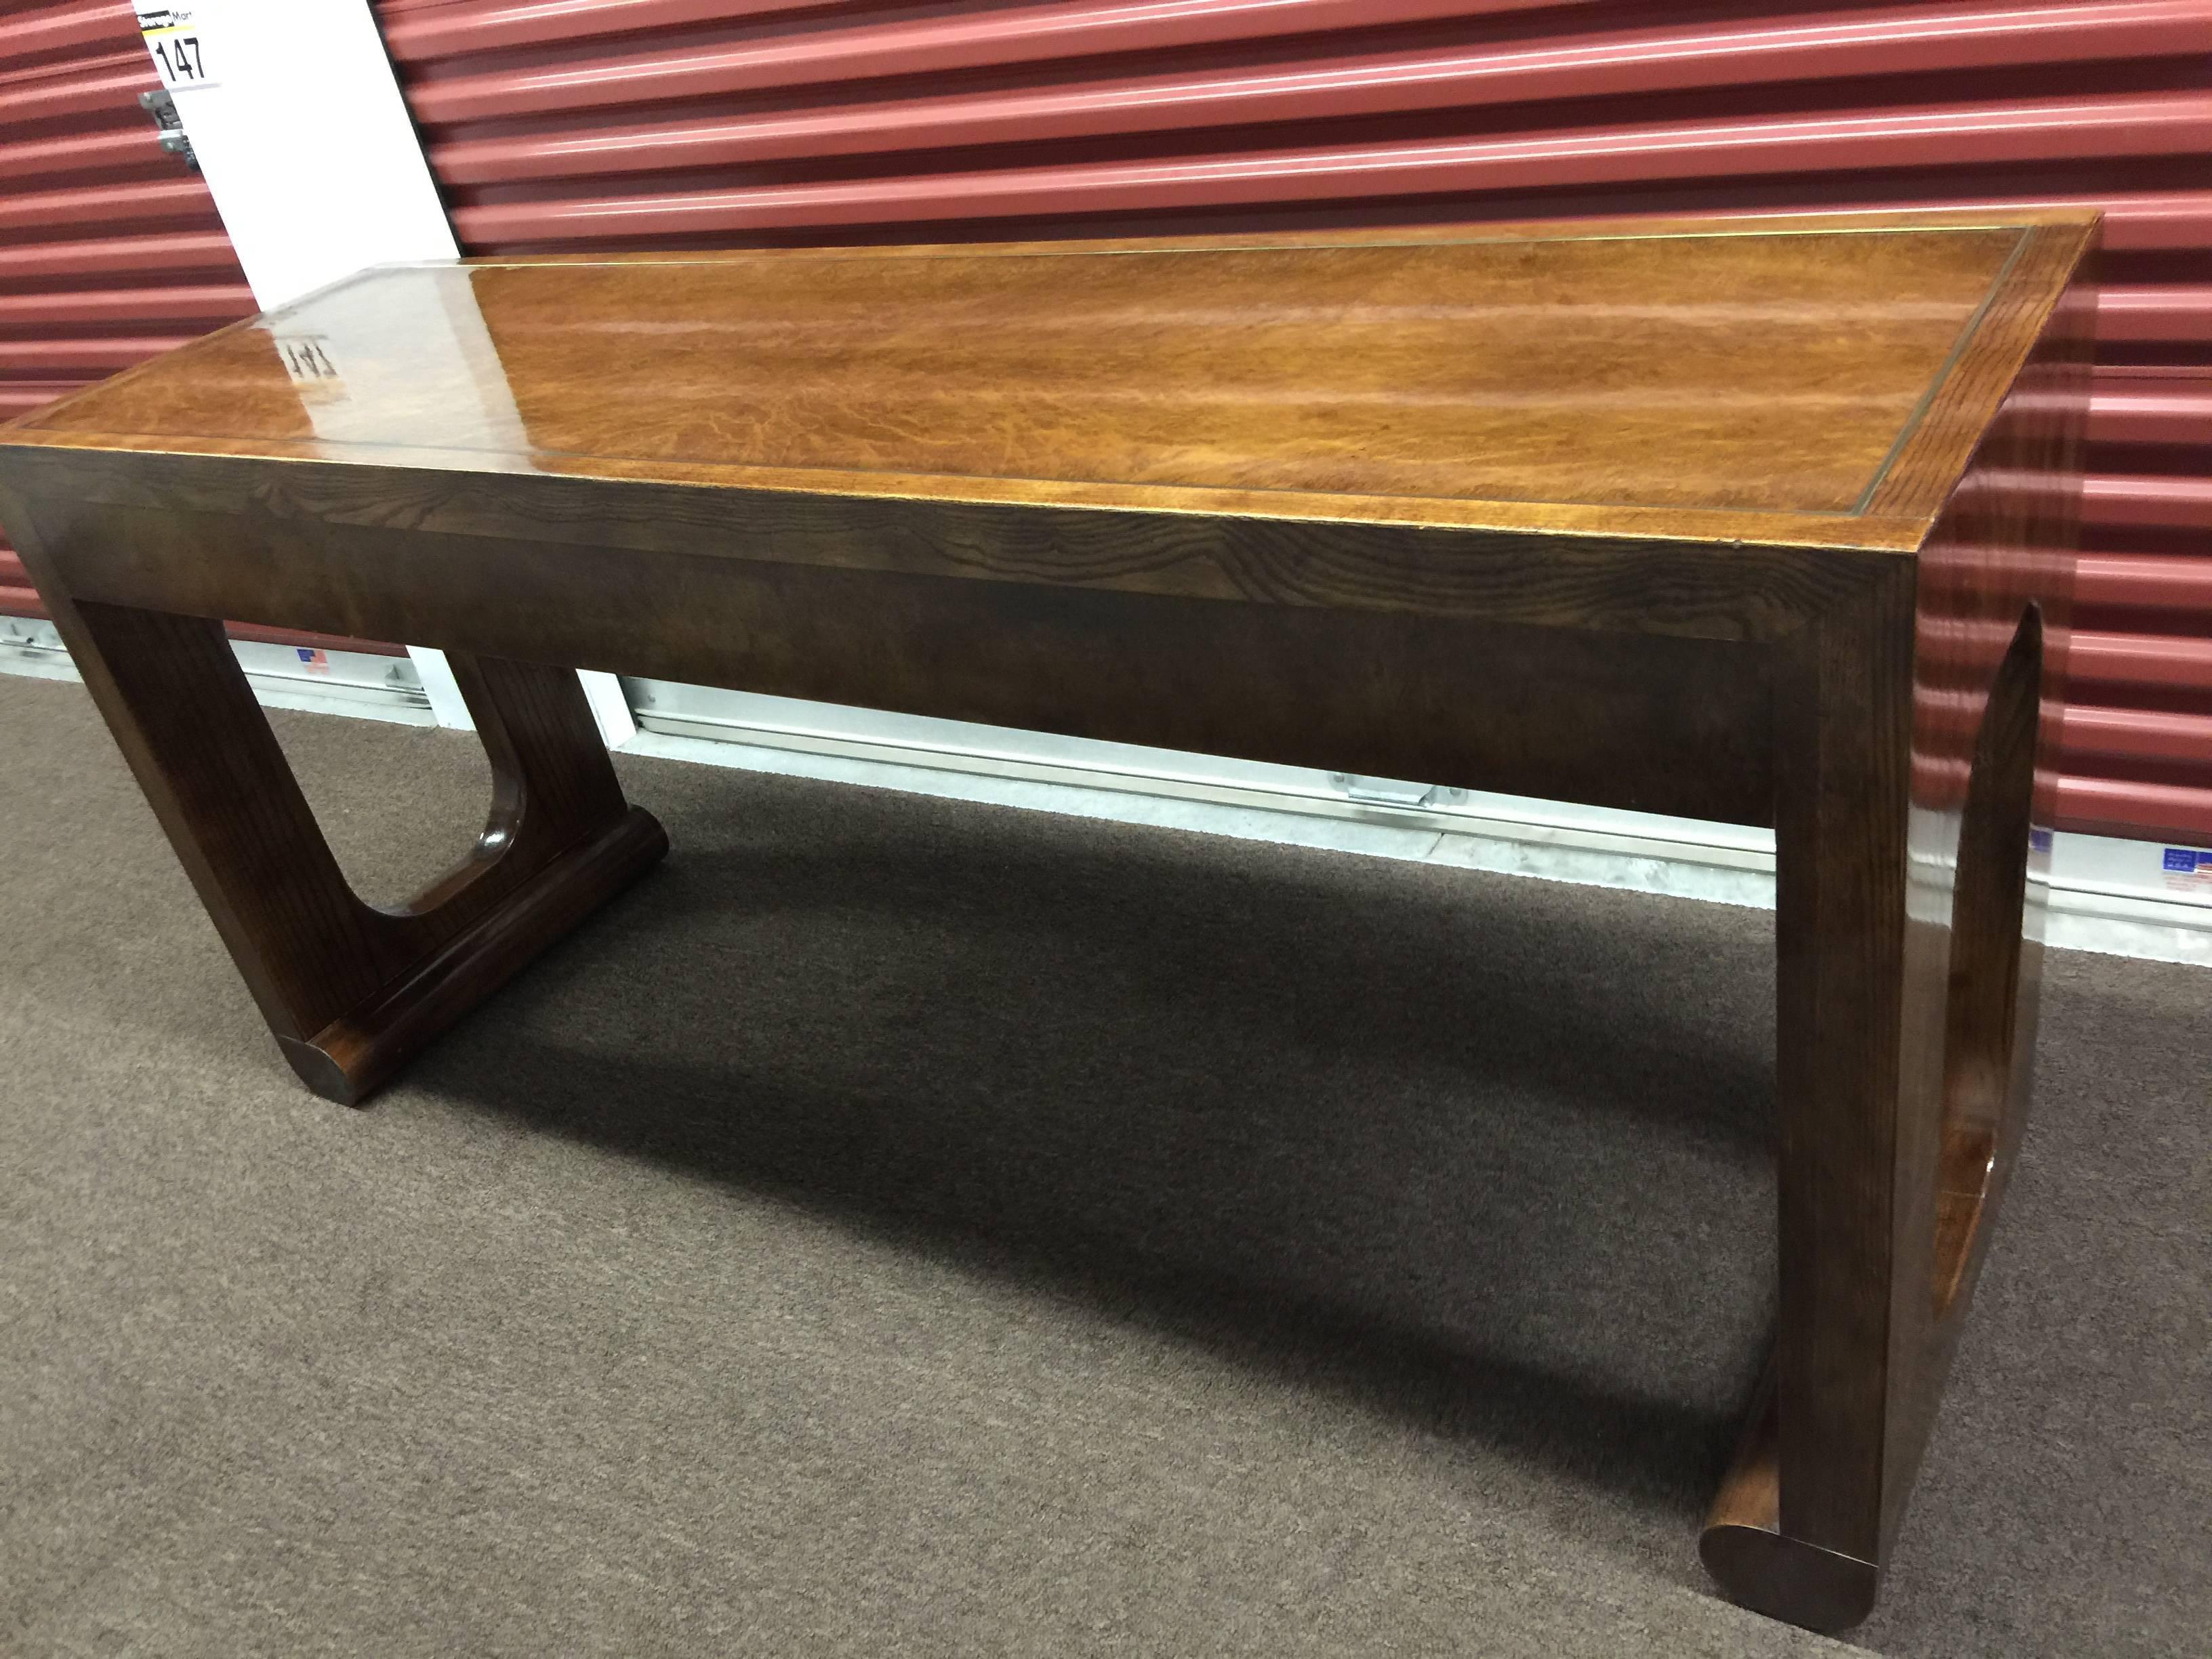  Glamorous Large Scale 1970s Decorator Console  In Excellent Condition For Sale In Mount Penn, PA